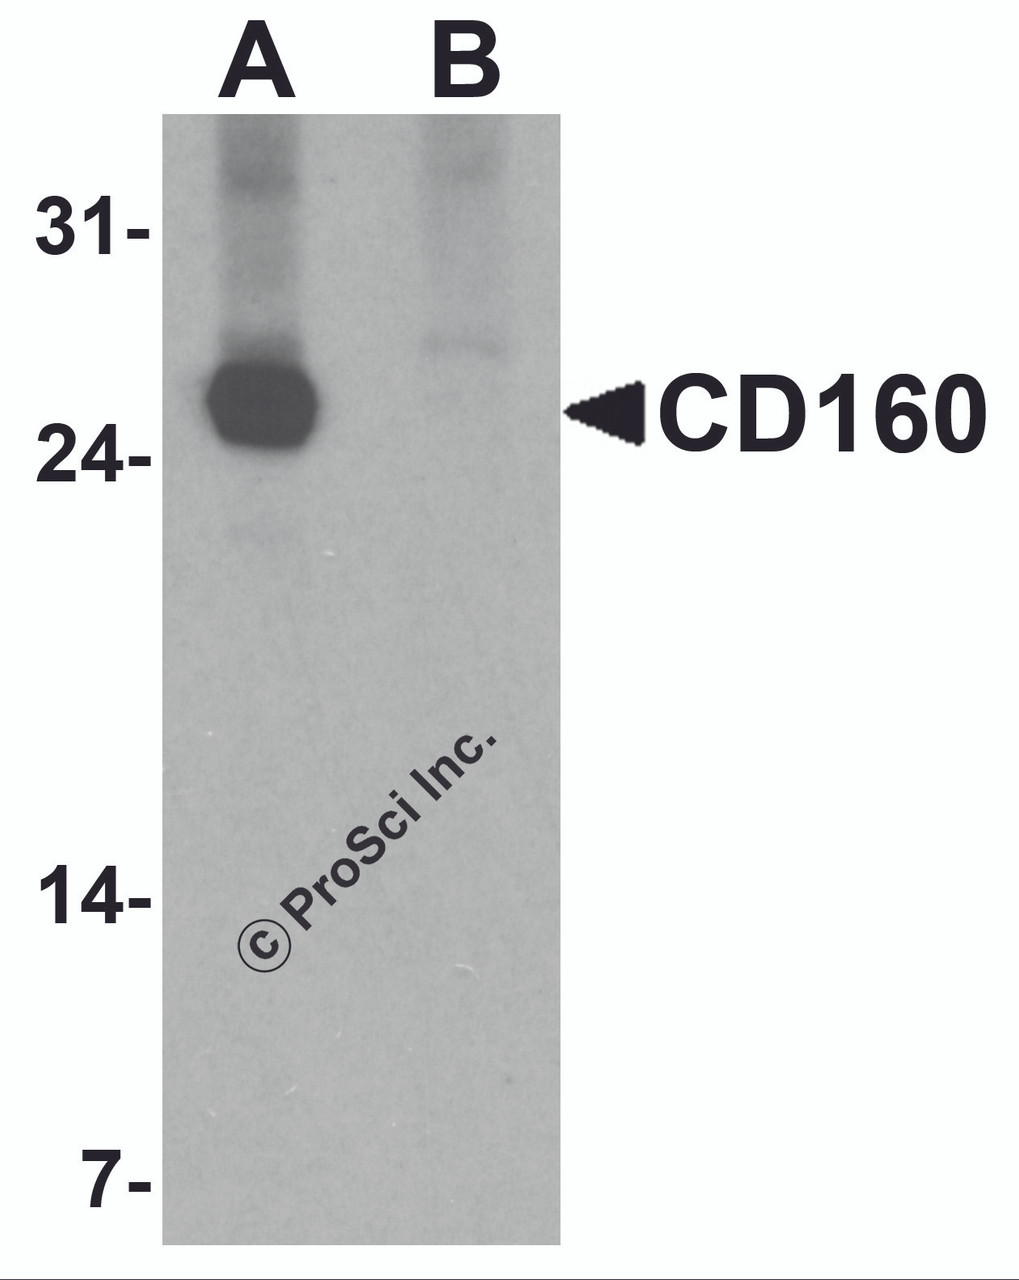 Western blot analysis of CD160 in K562 cell lysate with CD160 antibody at 1 &#956;g/ml in (A) the absence and (B) the presence of blocking peptide.